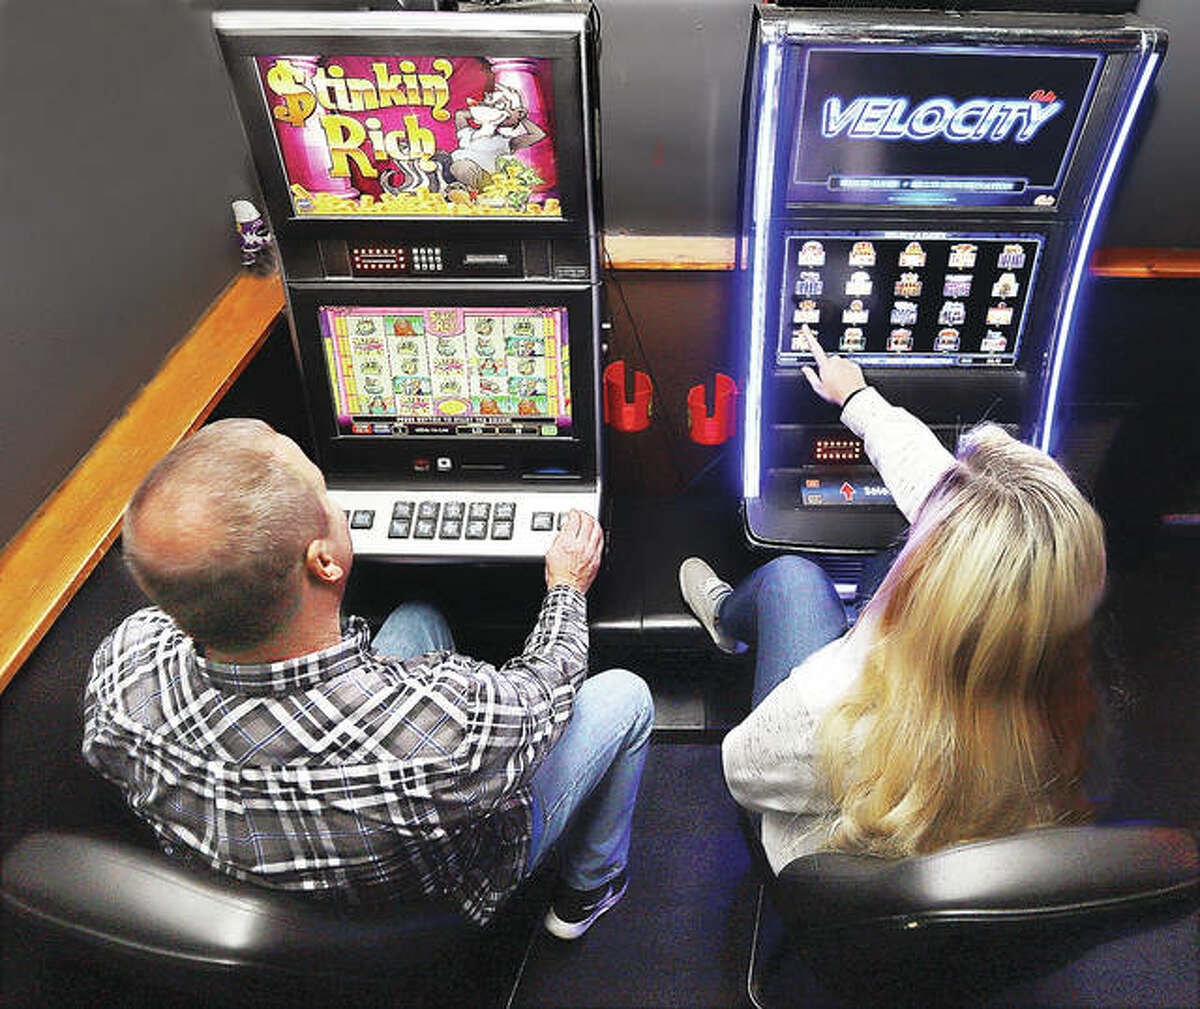 Slot machines are available inside Bubby and Sissy’s bar on Belle Street in Alton. The bar has offered video slots for some time and also offers poker and keno and a pool table. The bar is closed on Mondays, but is open 3 p.m. until midnight on Tuesday through Thursday, until 2 a.m. on Fridays and Saturdays and noon until midnight on Sundays. For more information, visit their Facebook. (File photo)